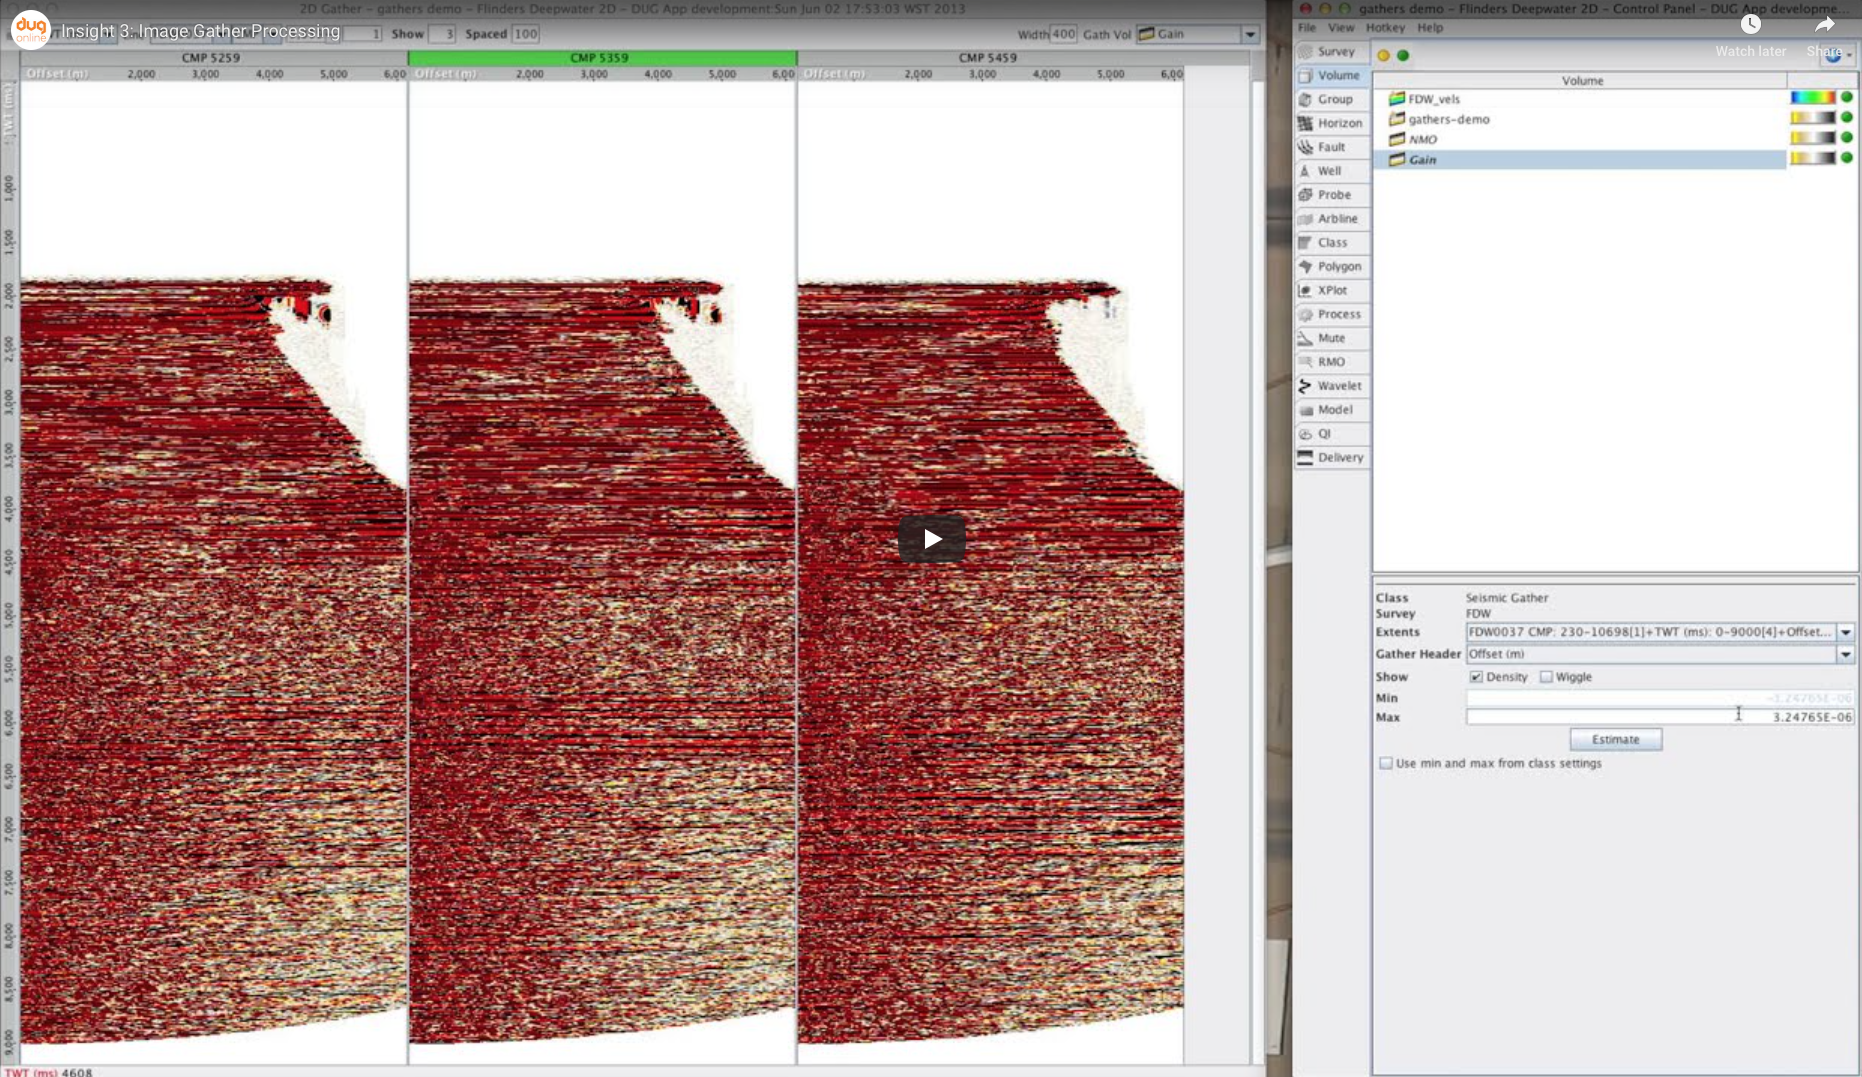 Image Gather processing in Insight 3